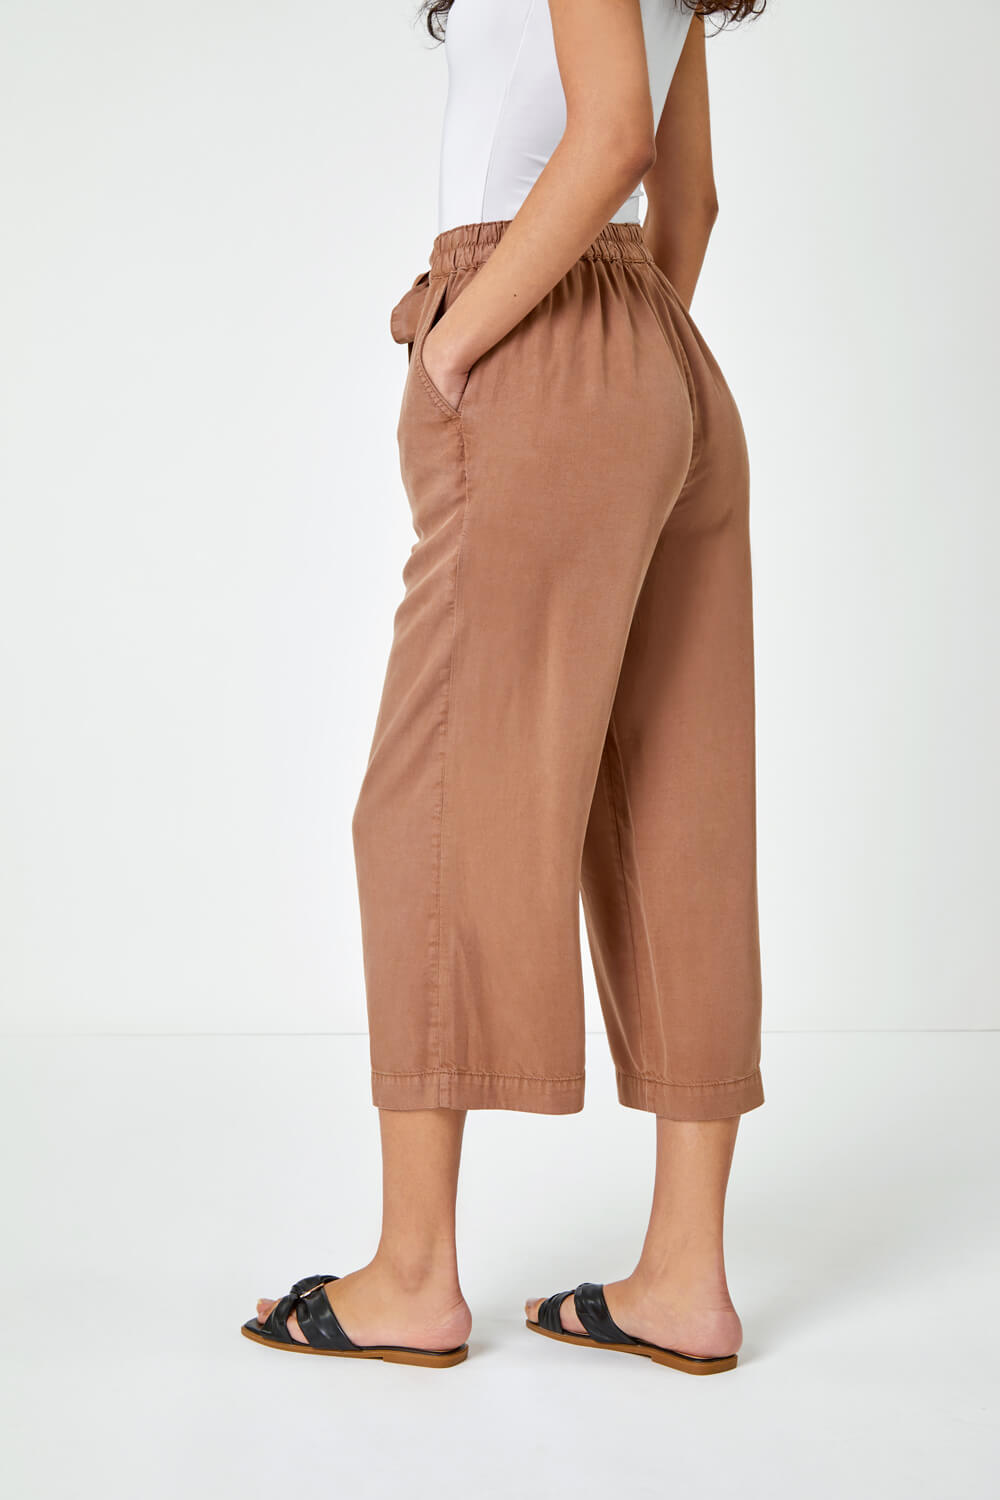 Tan Tie Detail Stretch Waist Culottes, Image 3 of 5